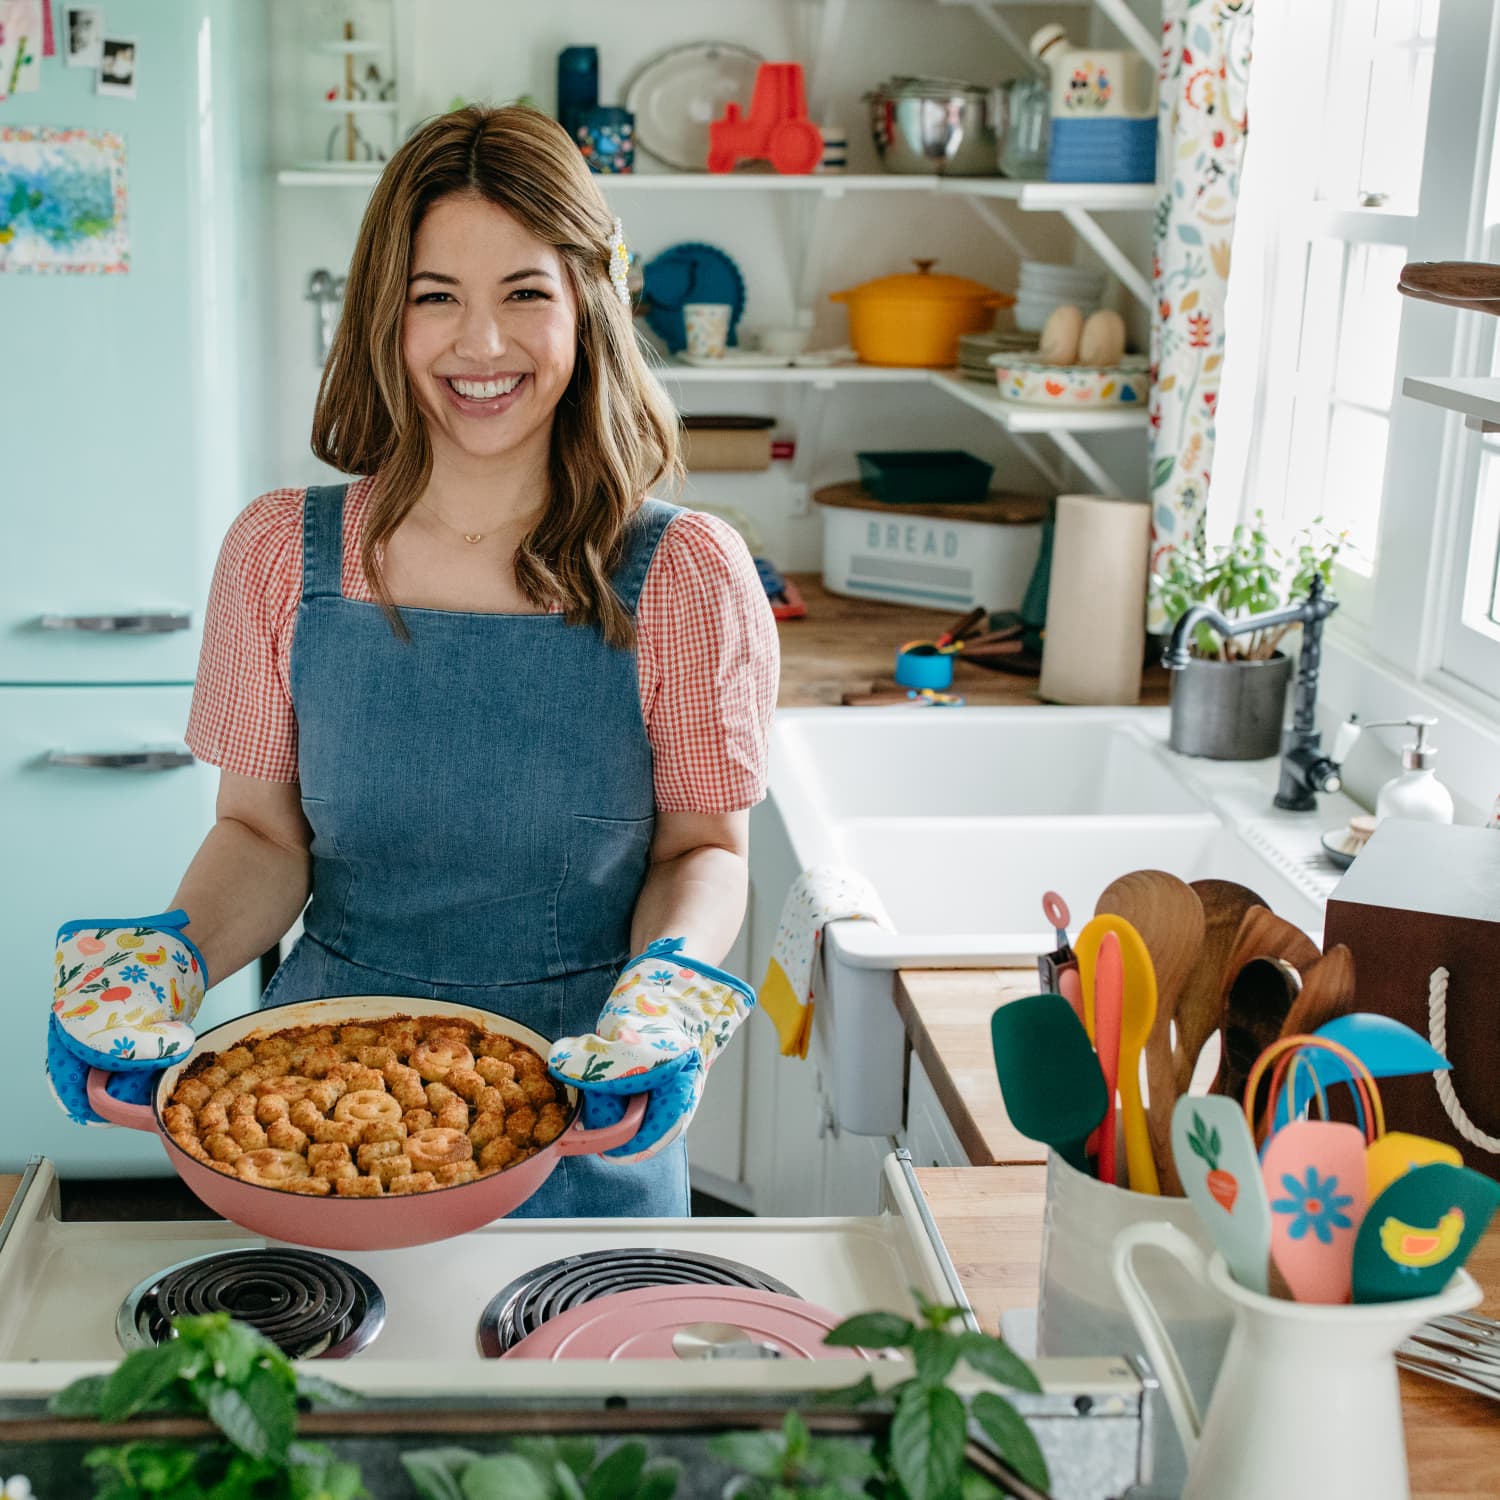 Food Network Star Molly Yeh Just Launched a Product Line With Macy's